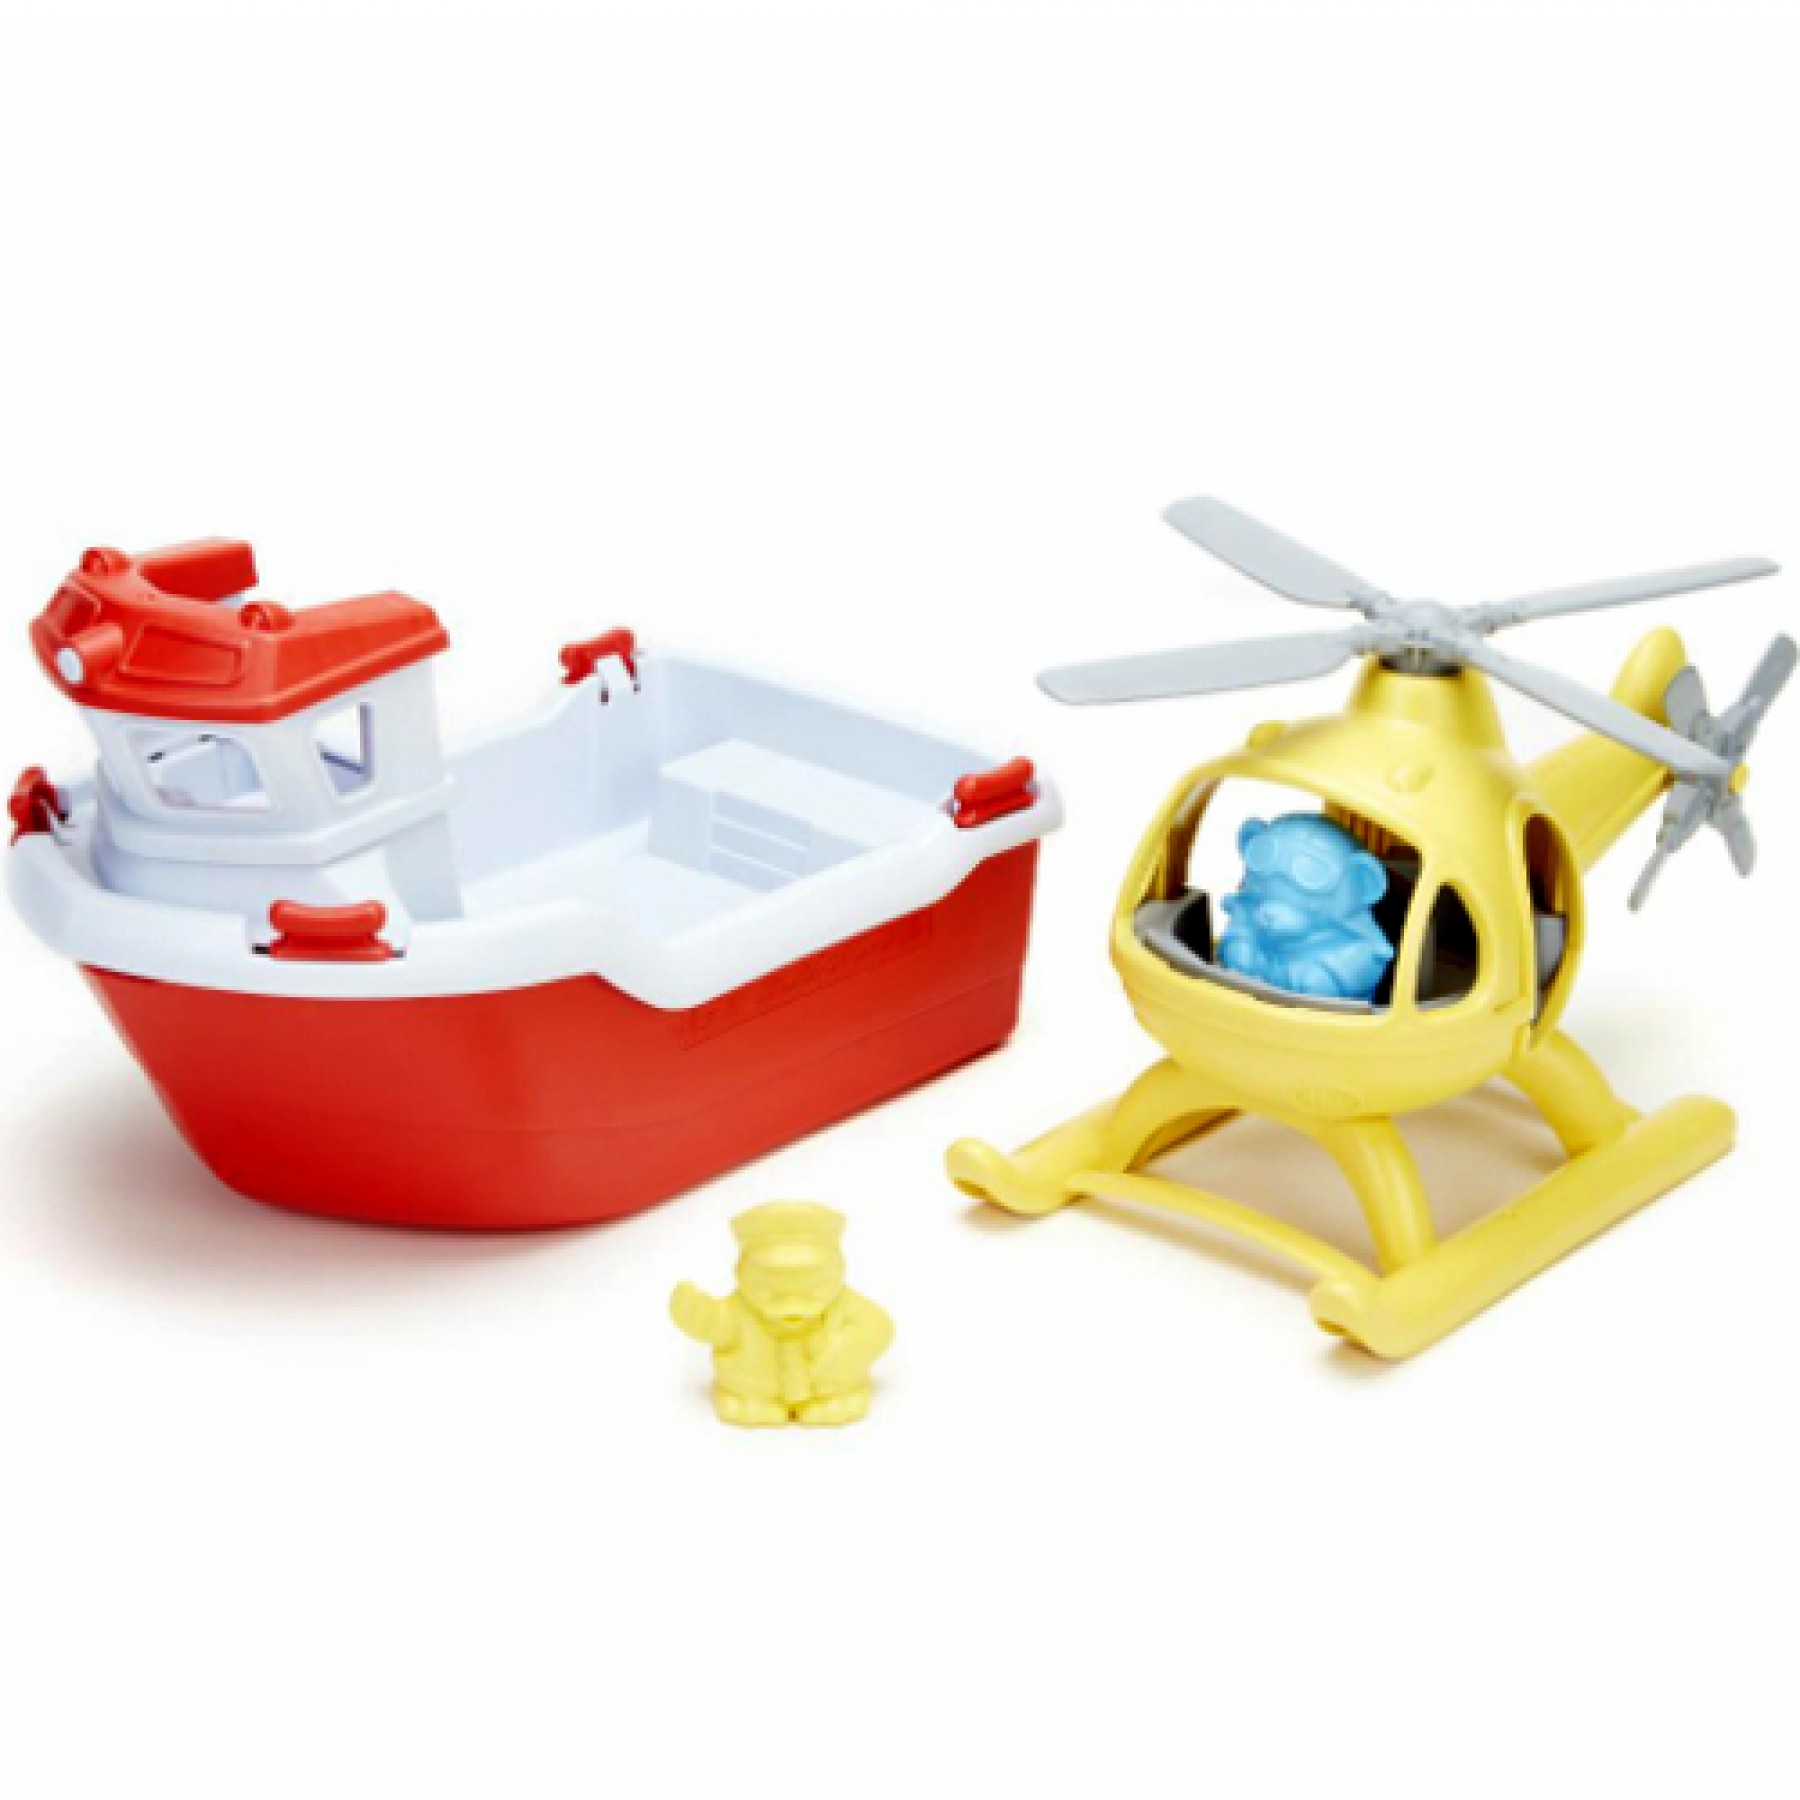 rescue boat with helicopter - green toys